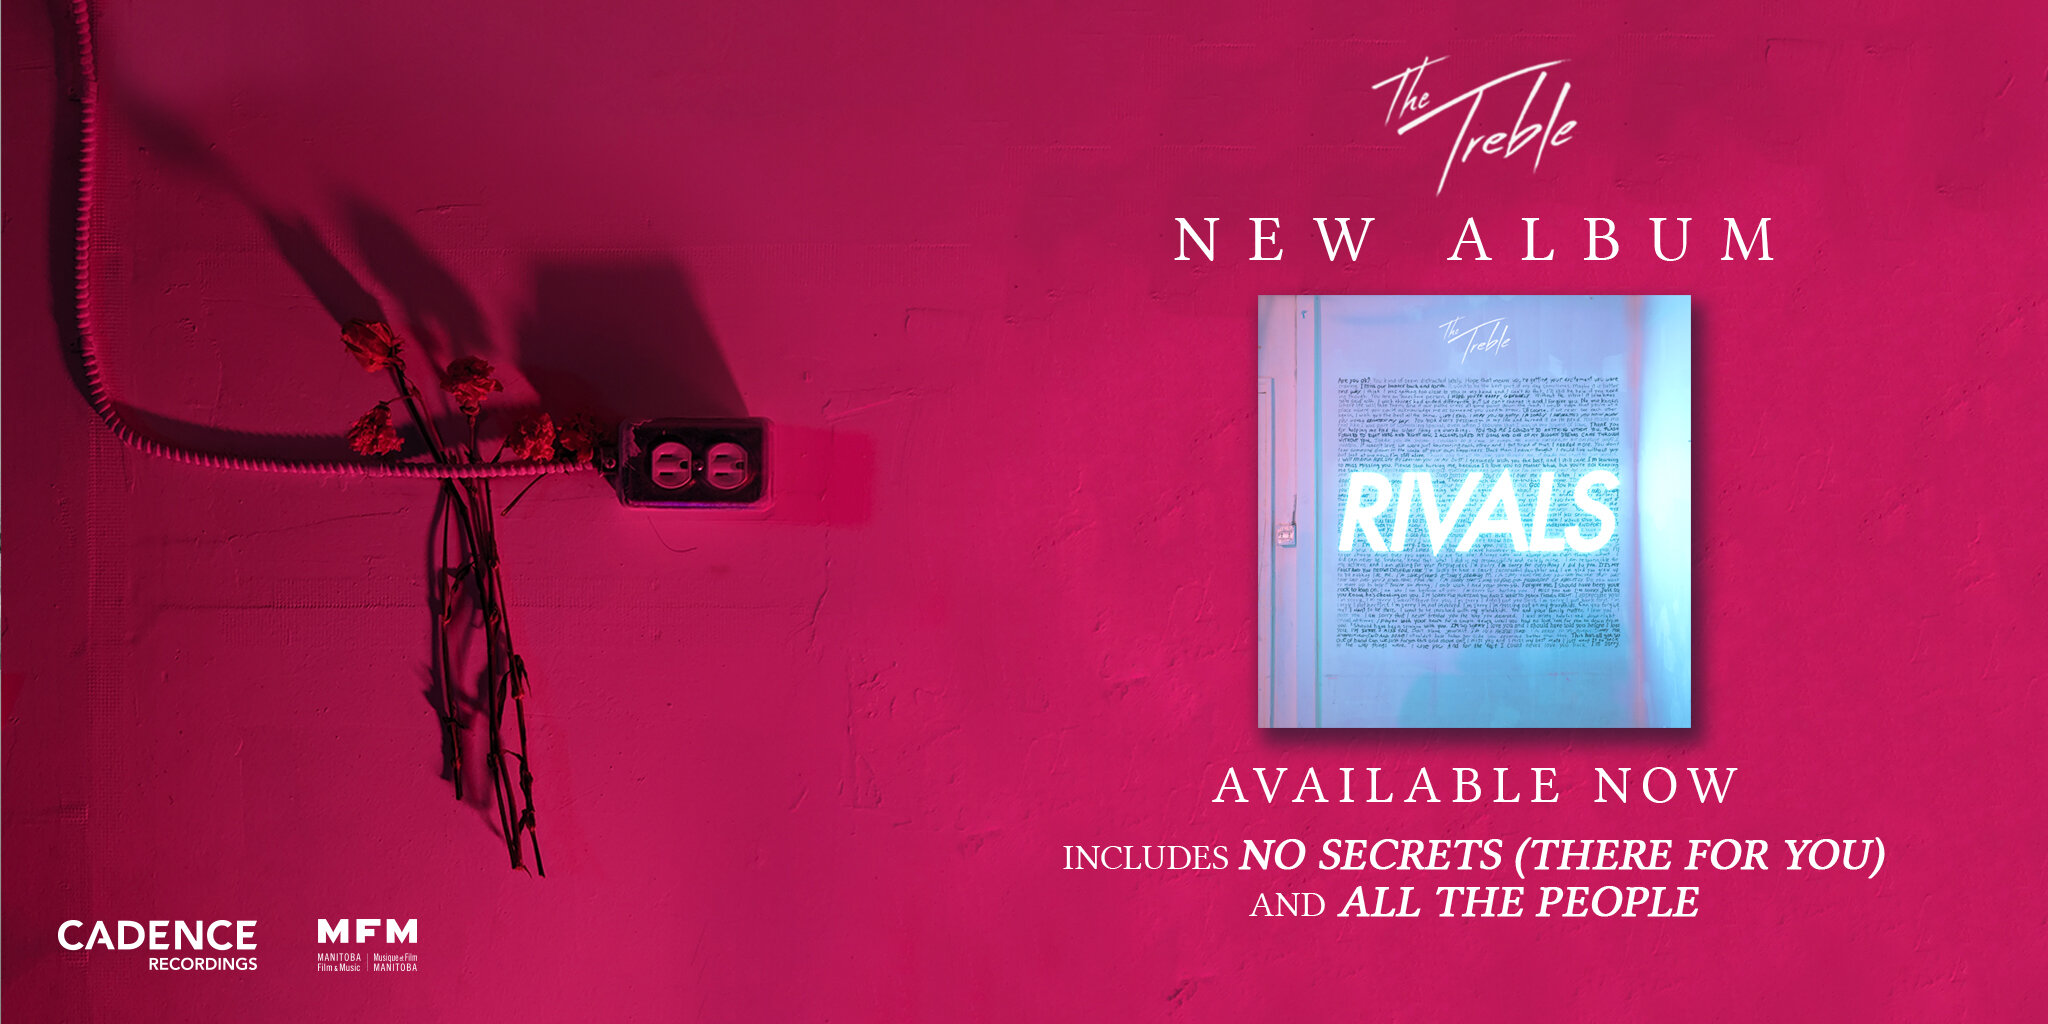 Rivals New Album Available Now.jpg